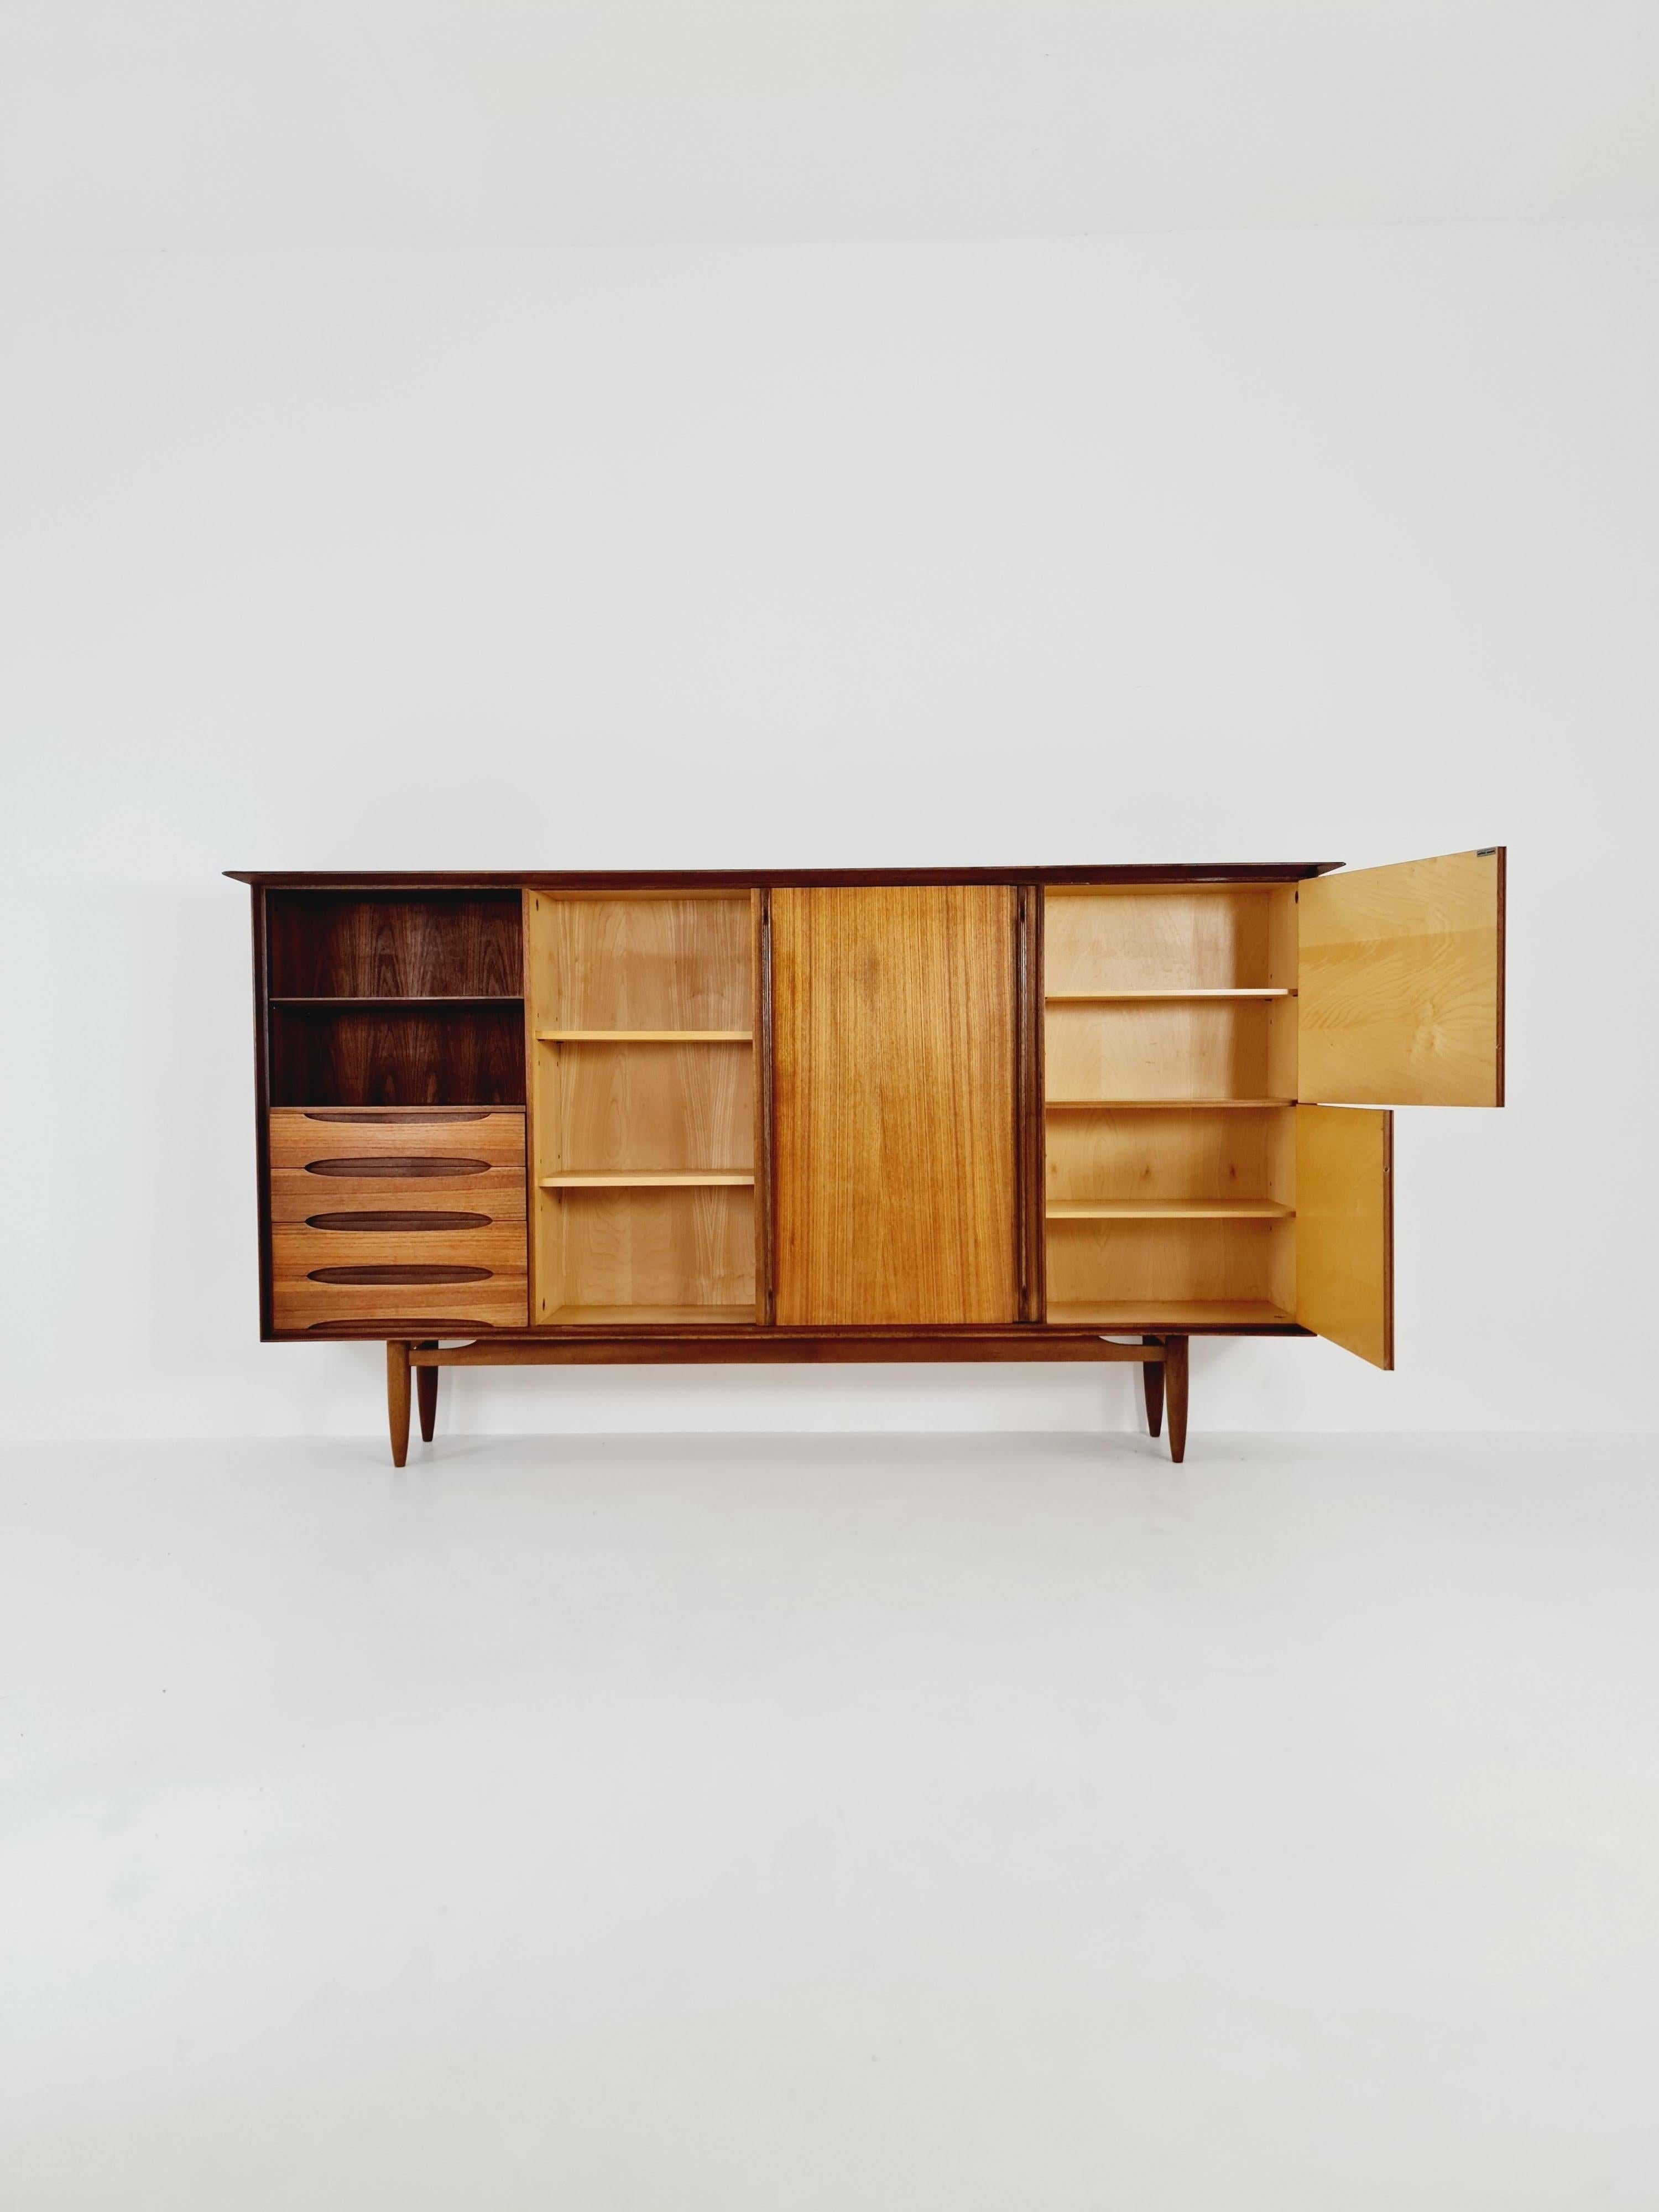 The high-quality highboard was produced by the manufacturer Omnia in the 1960s.

The furniture was designed in terms of dimensions and layout for plenty of storage space and offers plenty of space with three cupboard parts, the bar compartment and